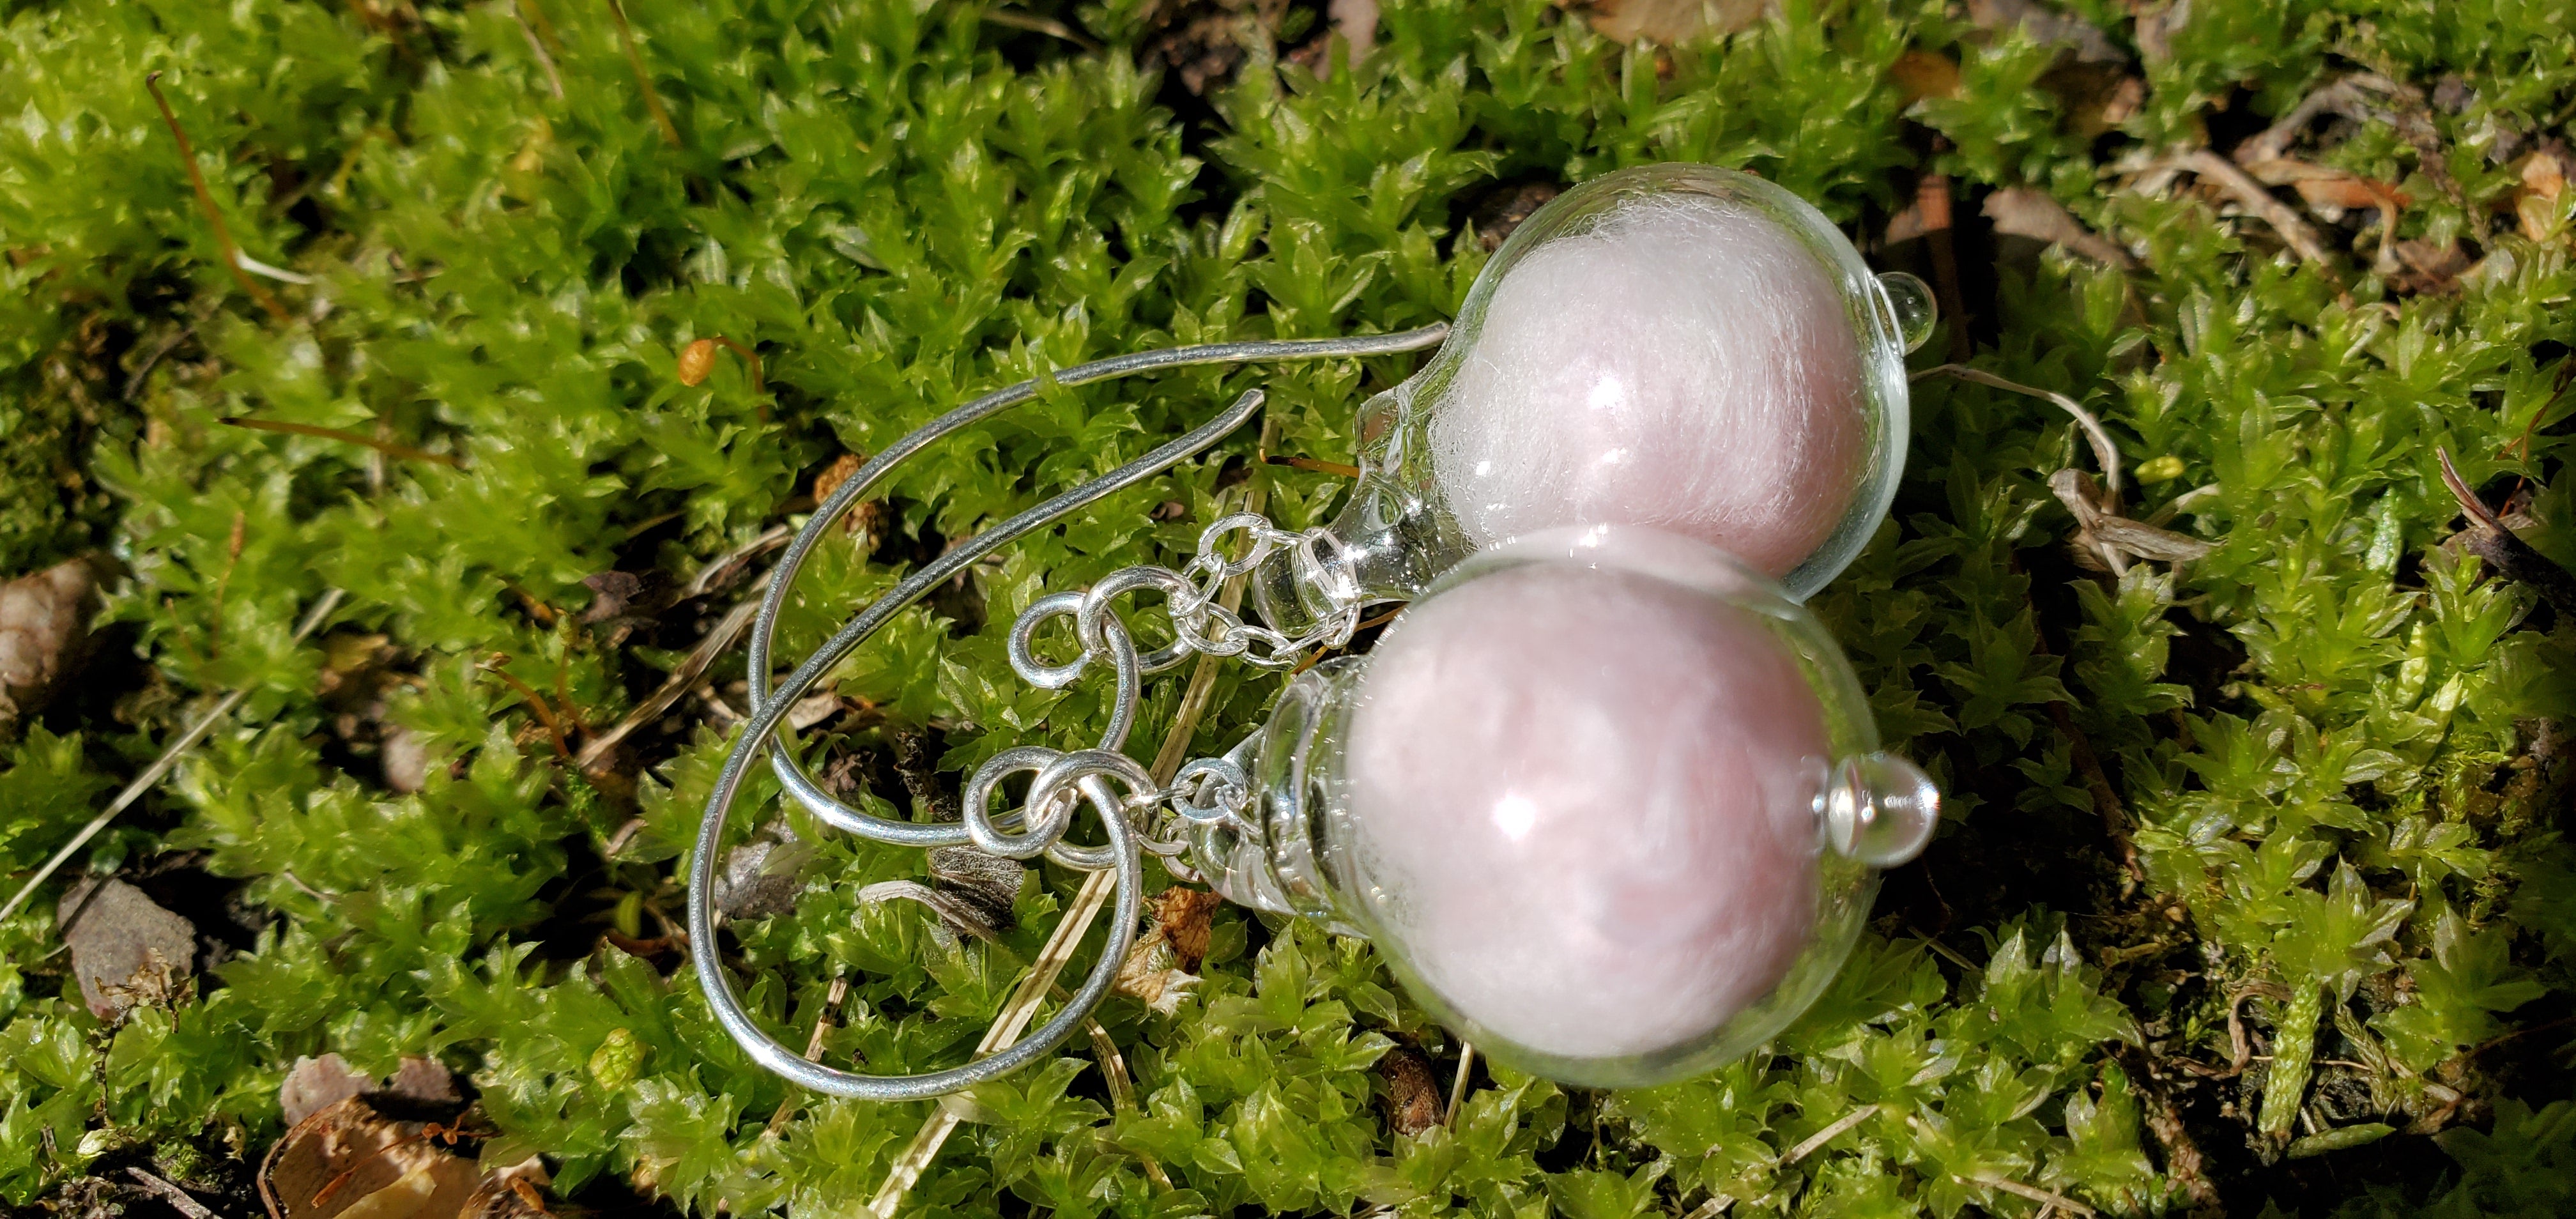 Cotton candy earrings